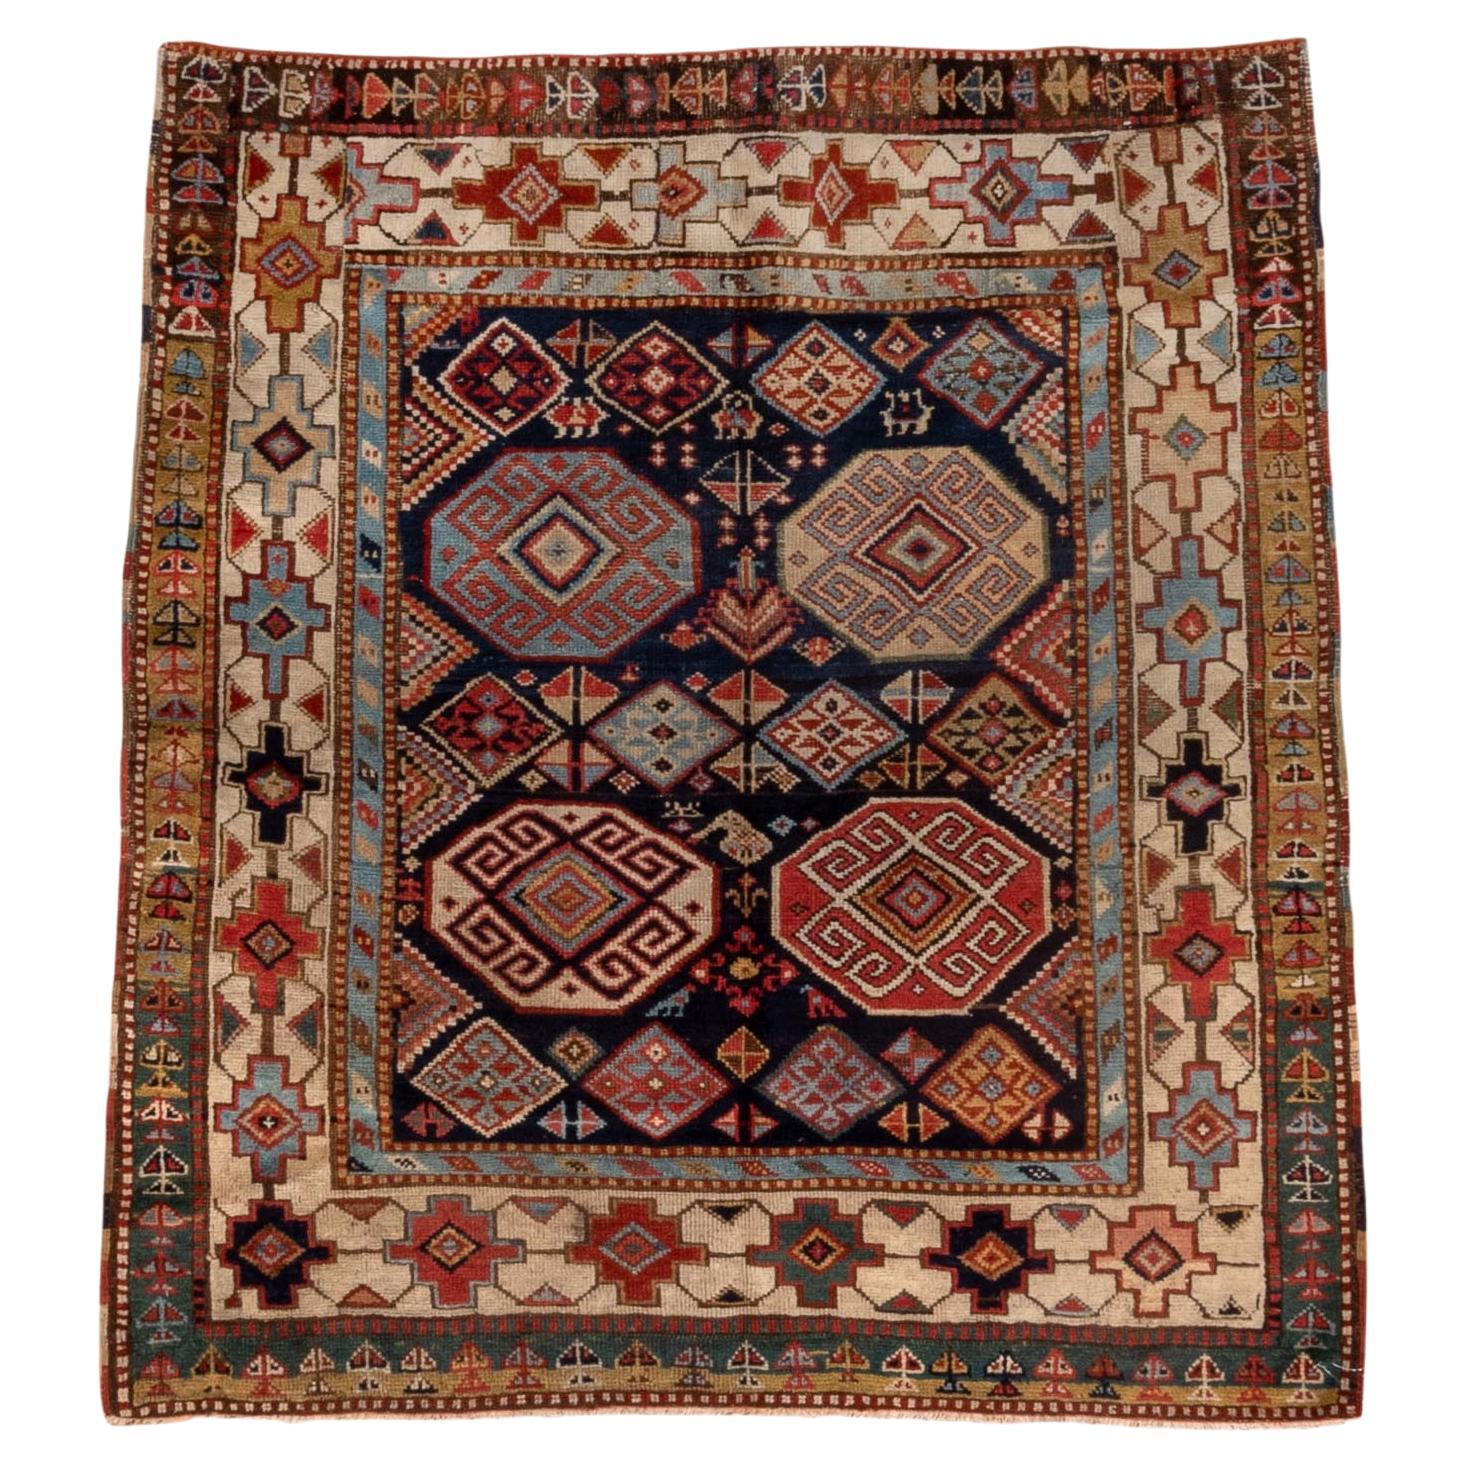 Antique Shirvan Rug in Almost Square with Red Purple and Khaki Tones, Circa 1910